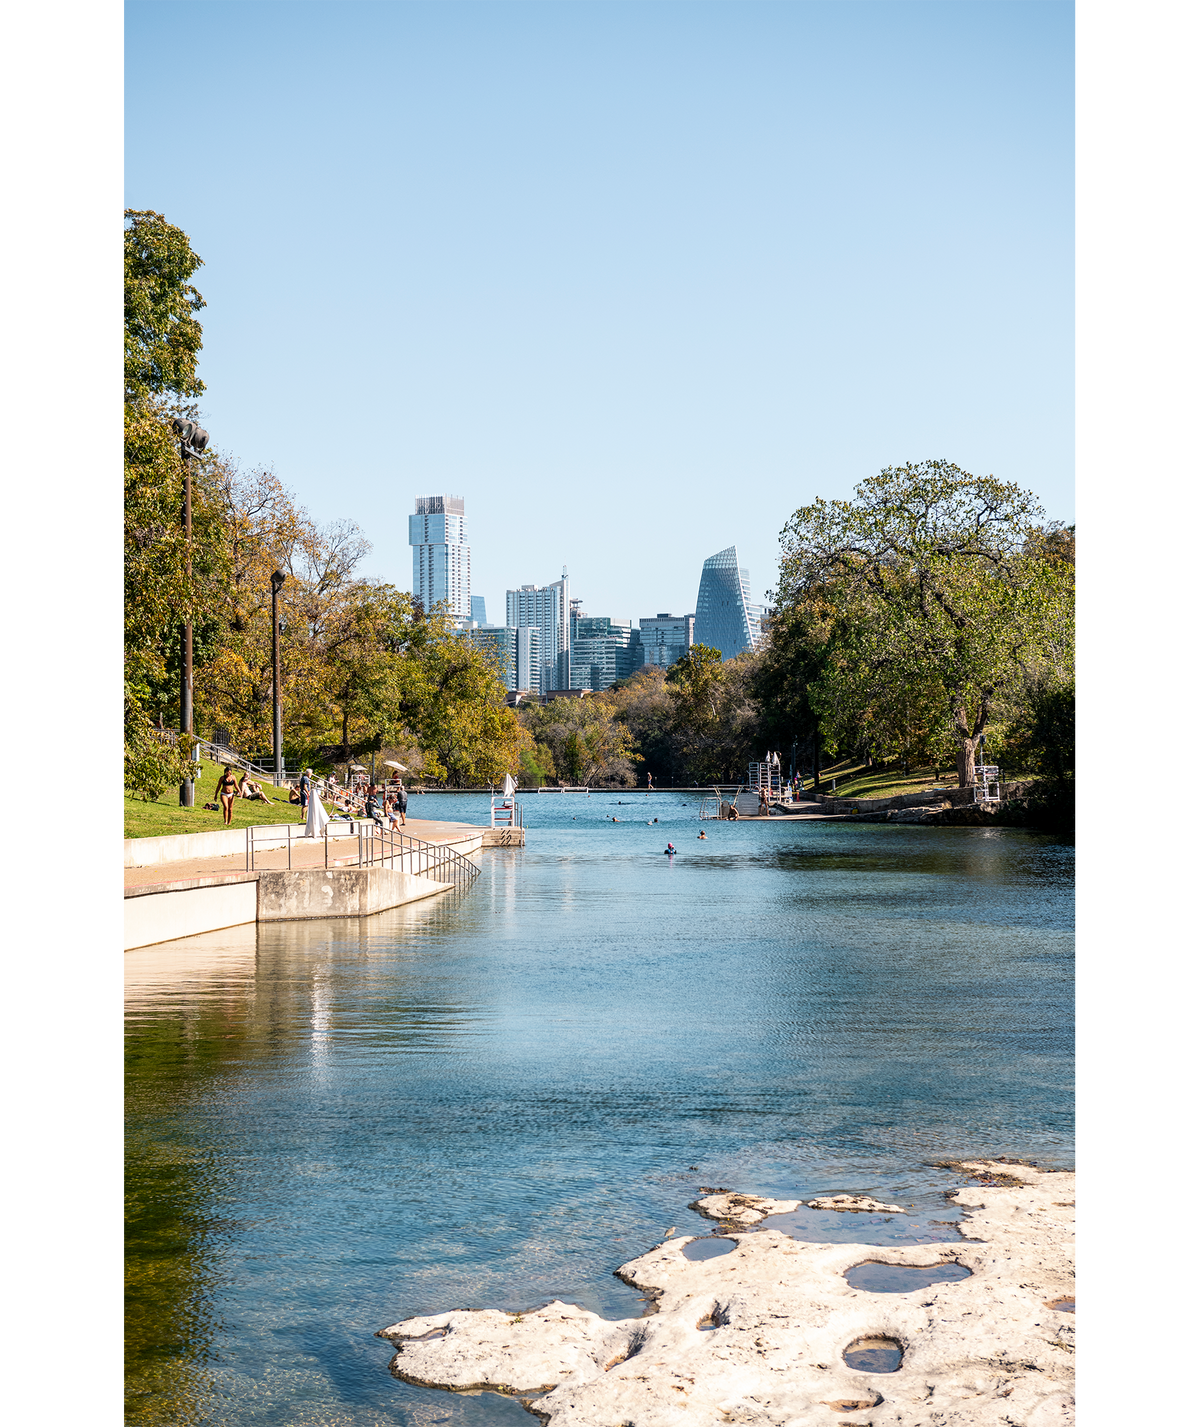 Swimmers enjoy the sunny day at Barton Springs Pool